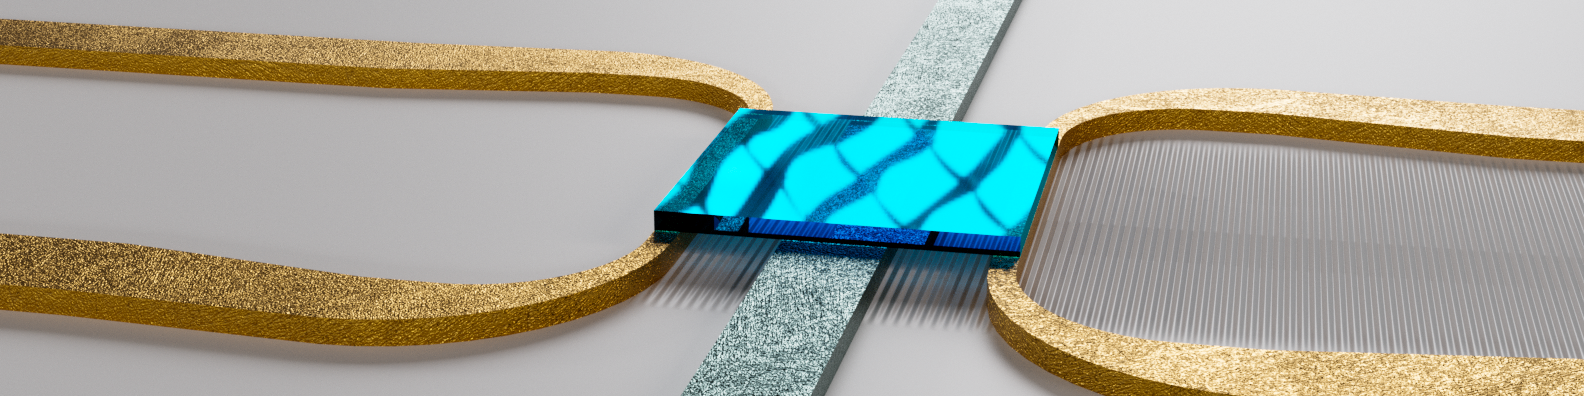 Artistic representation of the setup of an experiment controlling spin waves travelingin YIG thin layers using superconductivity. Credit: Michael Borst, TU Delft